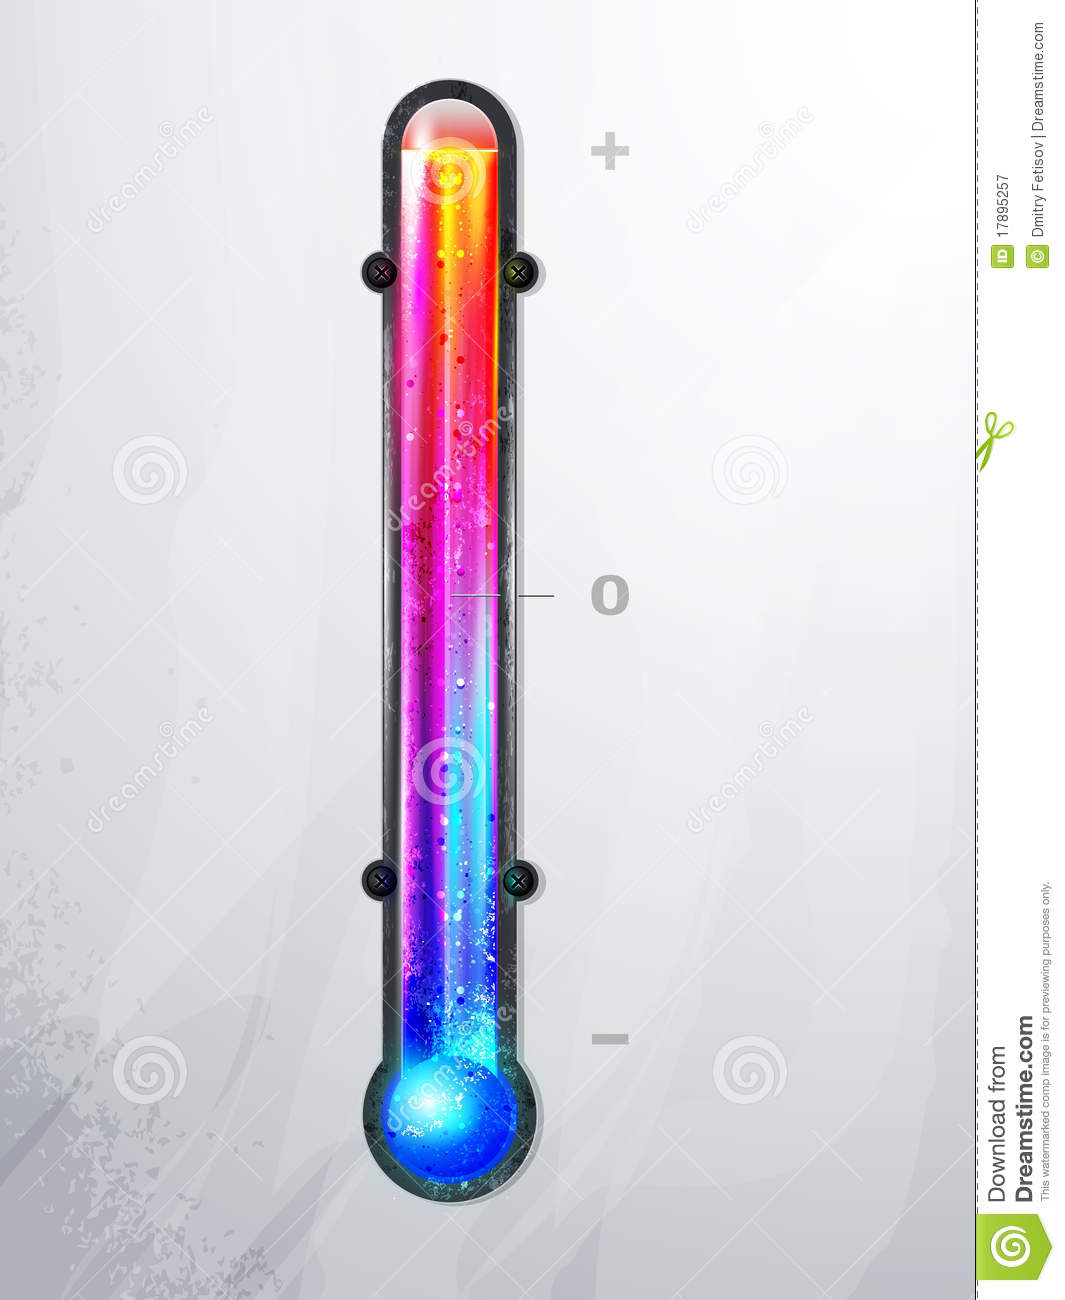 Thermometer Icon Of Hot And Cold Indicator  Eps10 Royalty Free Stock